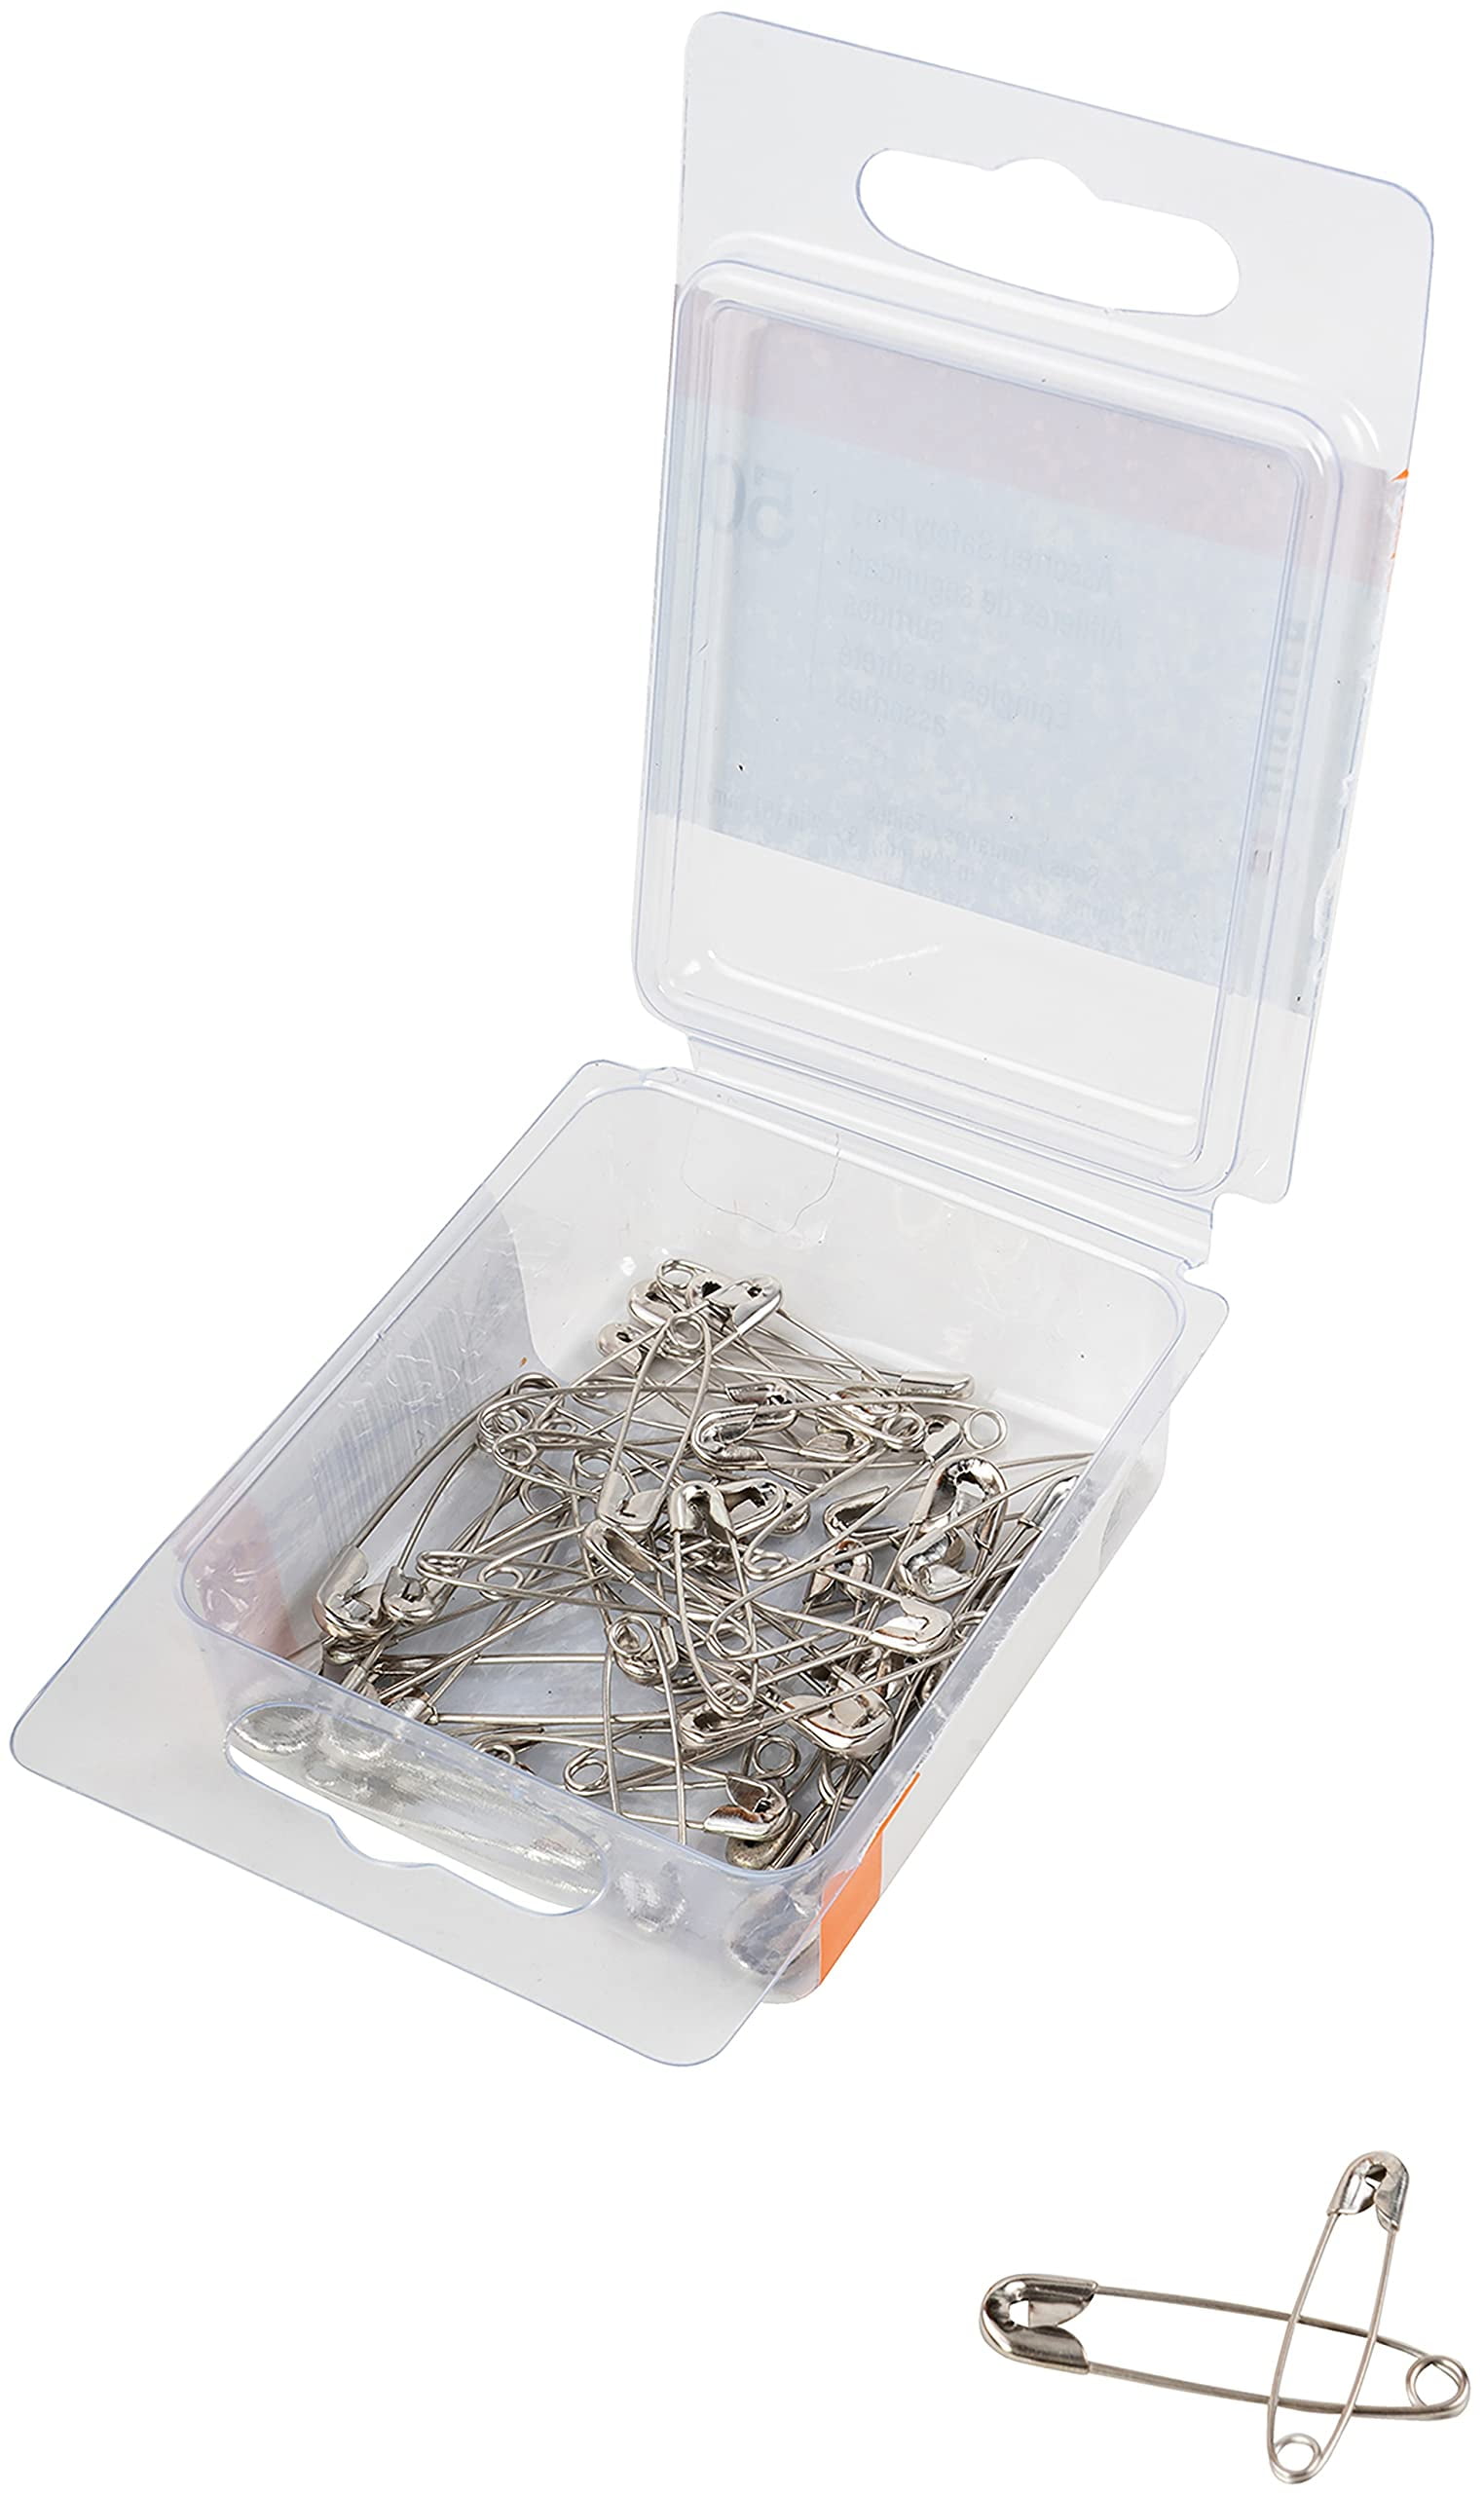  SINGER 00206 Quilting and Craft Safety Pins, Size 3, 20-Count